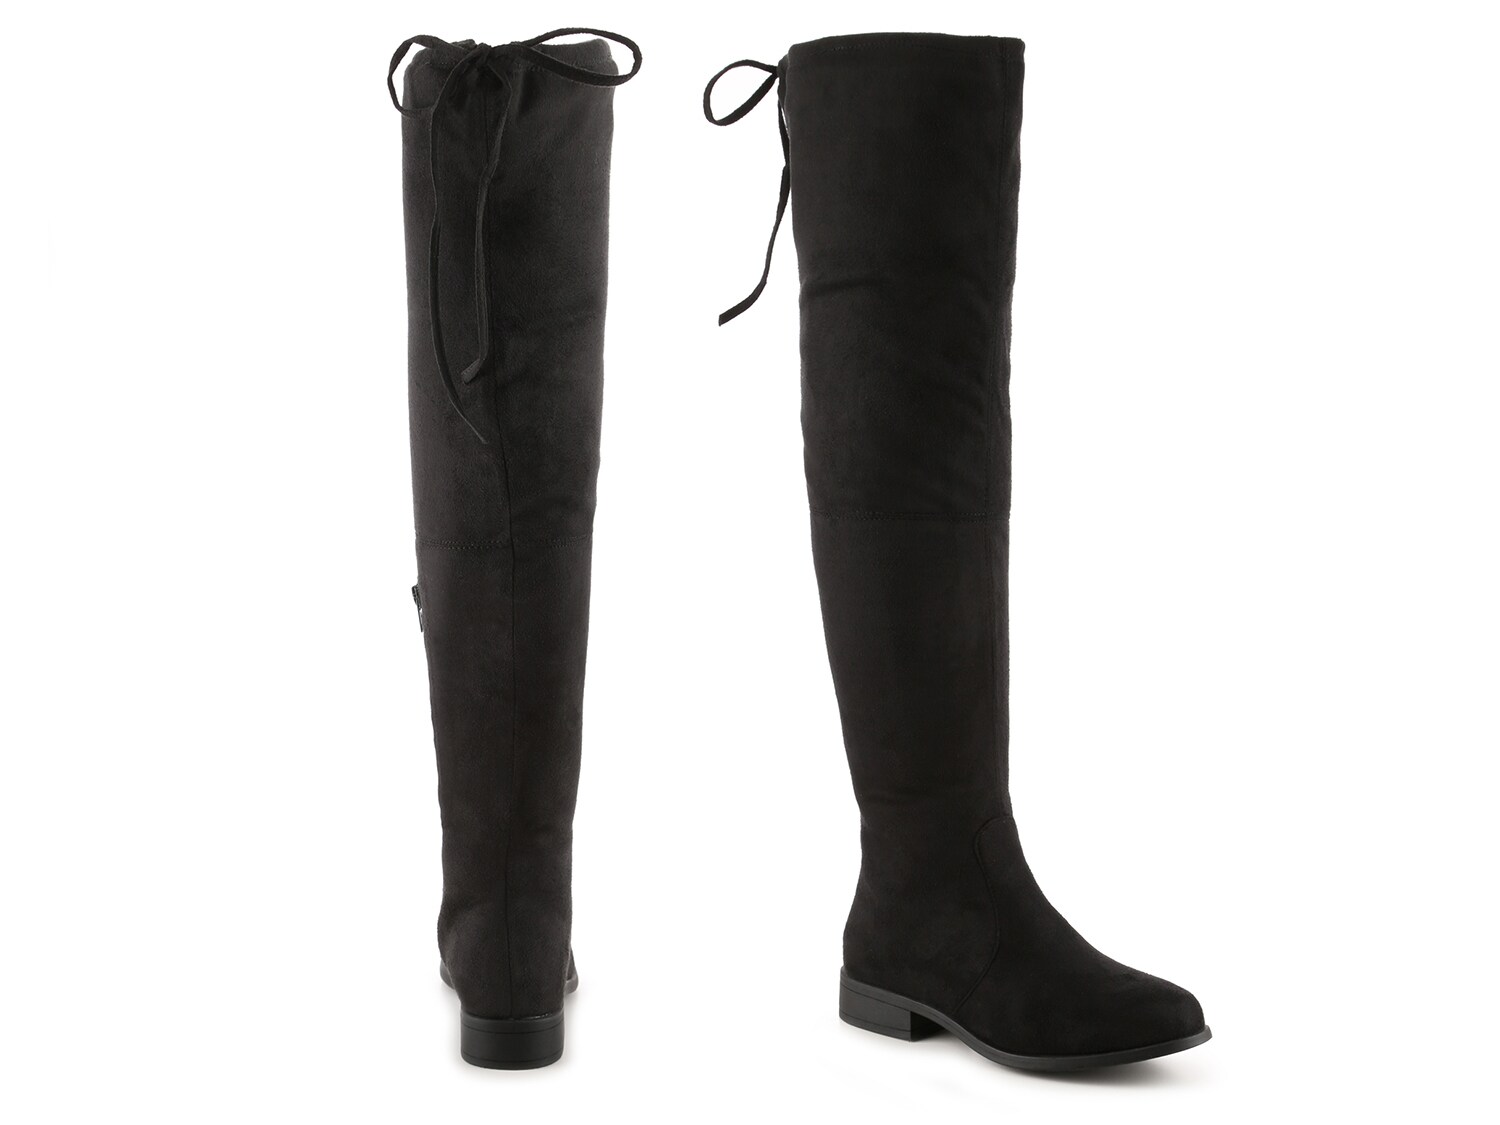 Journee Collection Mount Over-the-Knee Boot - Free Shipping | DSW